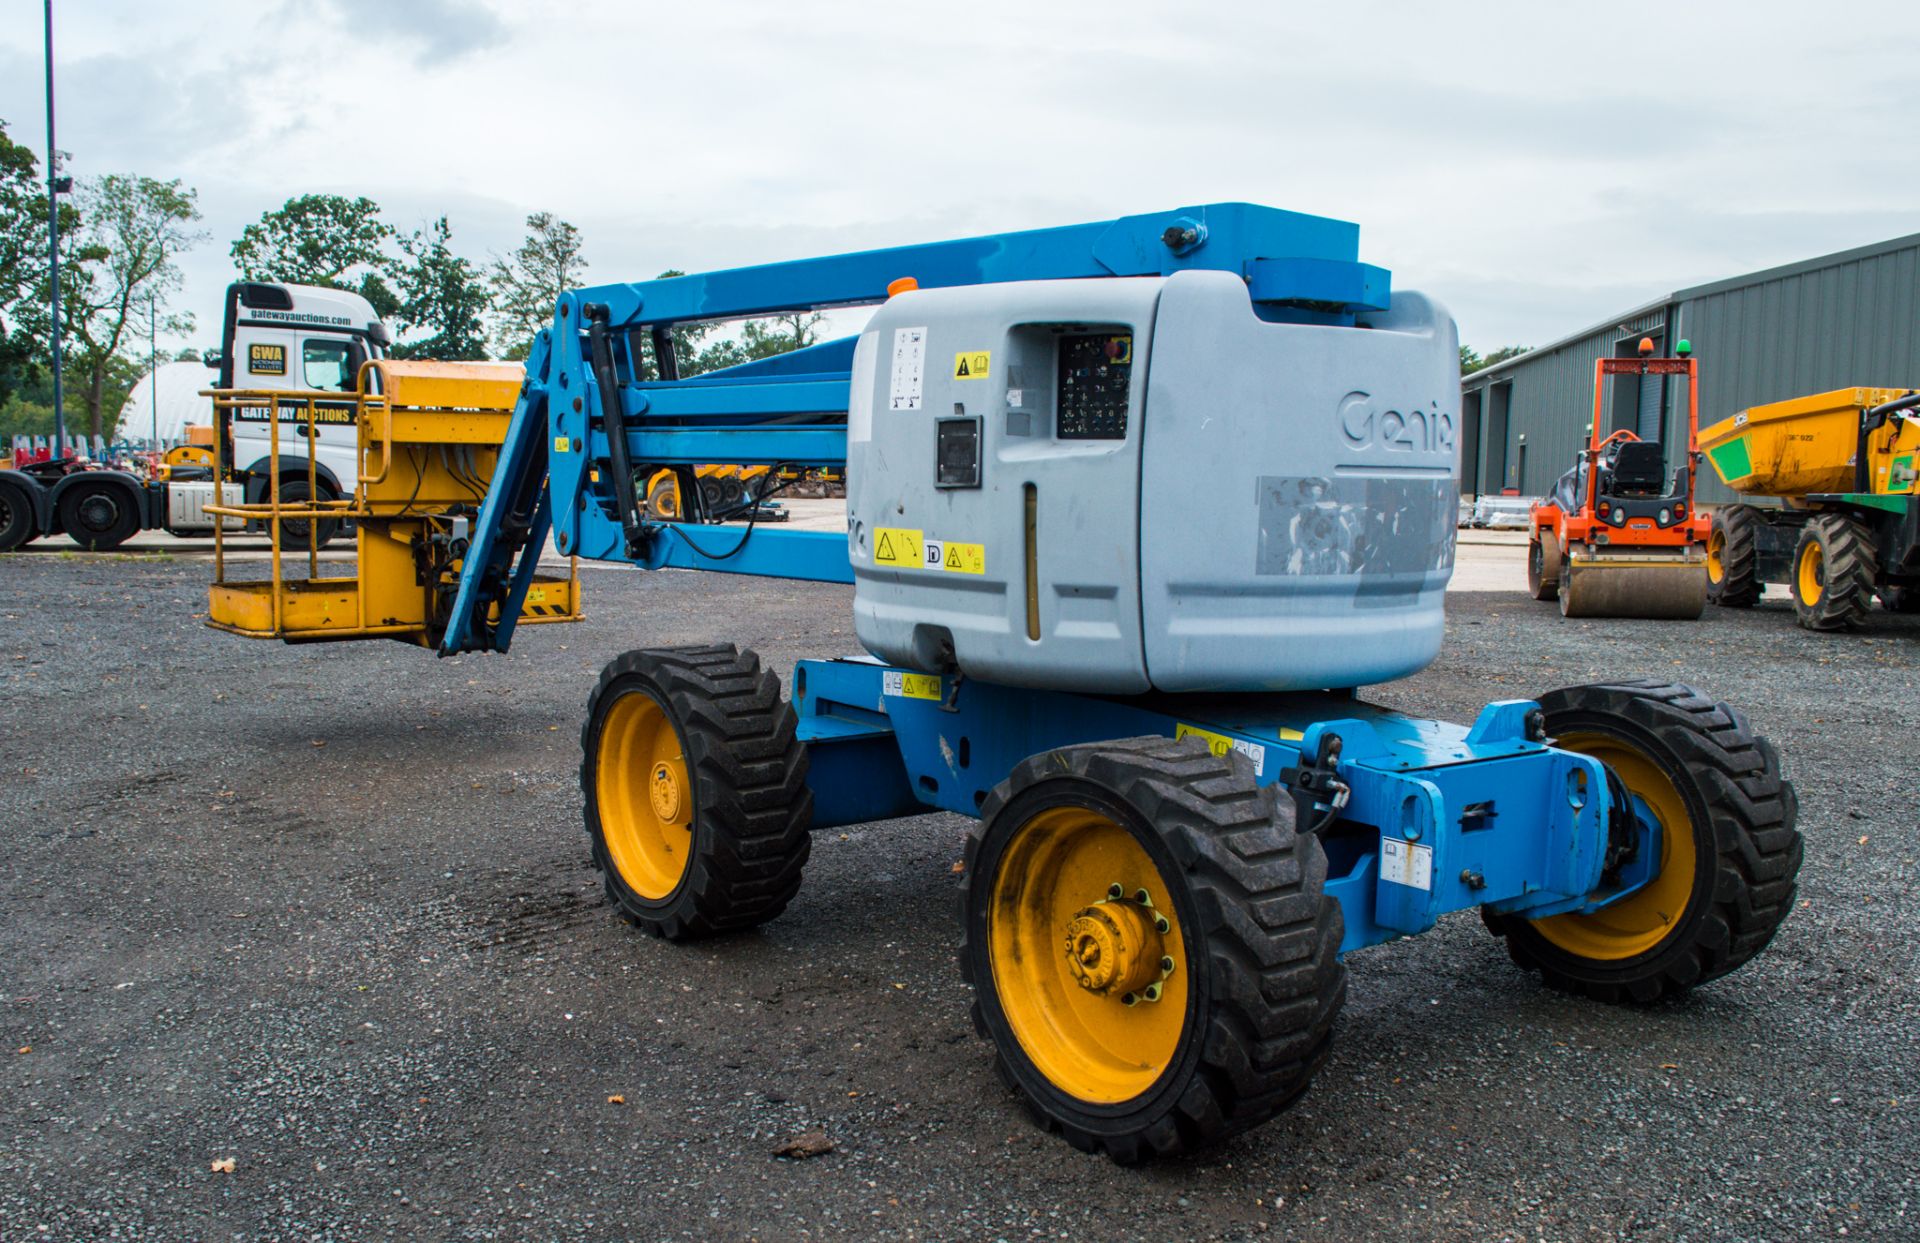 Genie Z-45/25 45 foot diesel driven 4WD articulated boom lift Year: 2011 S/N: 11B-1672 Recorded - Image 2 of 15